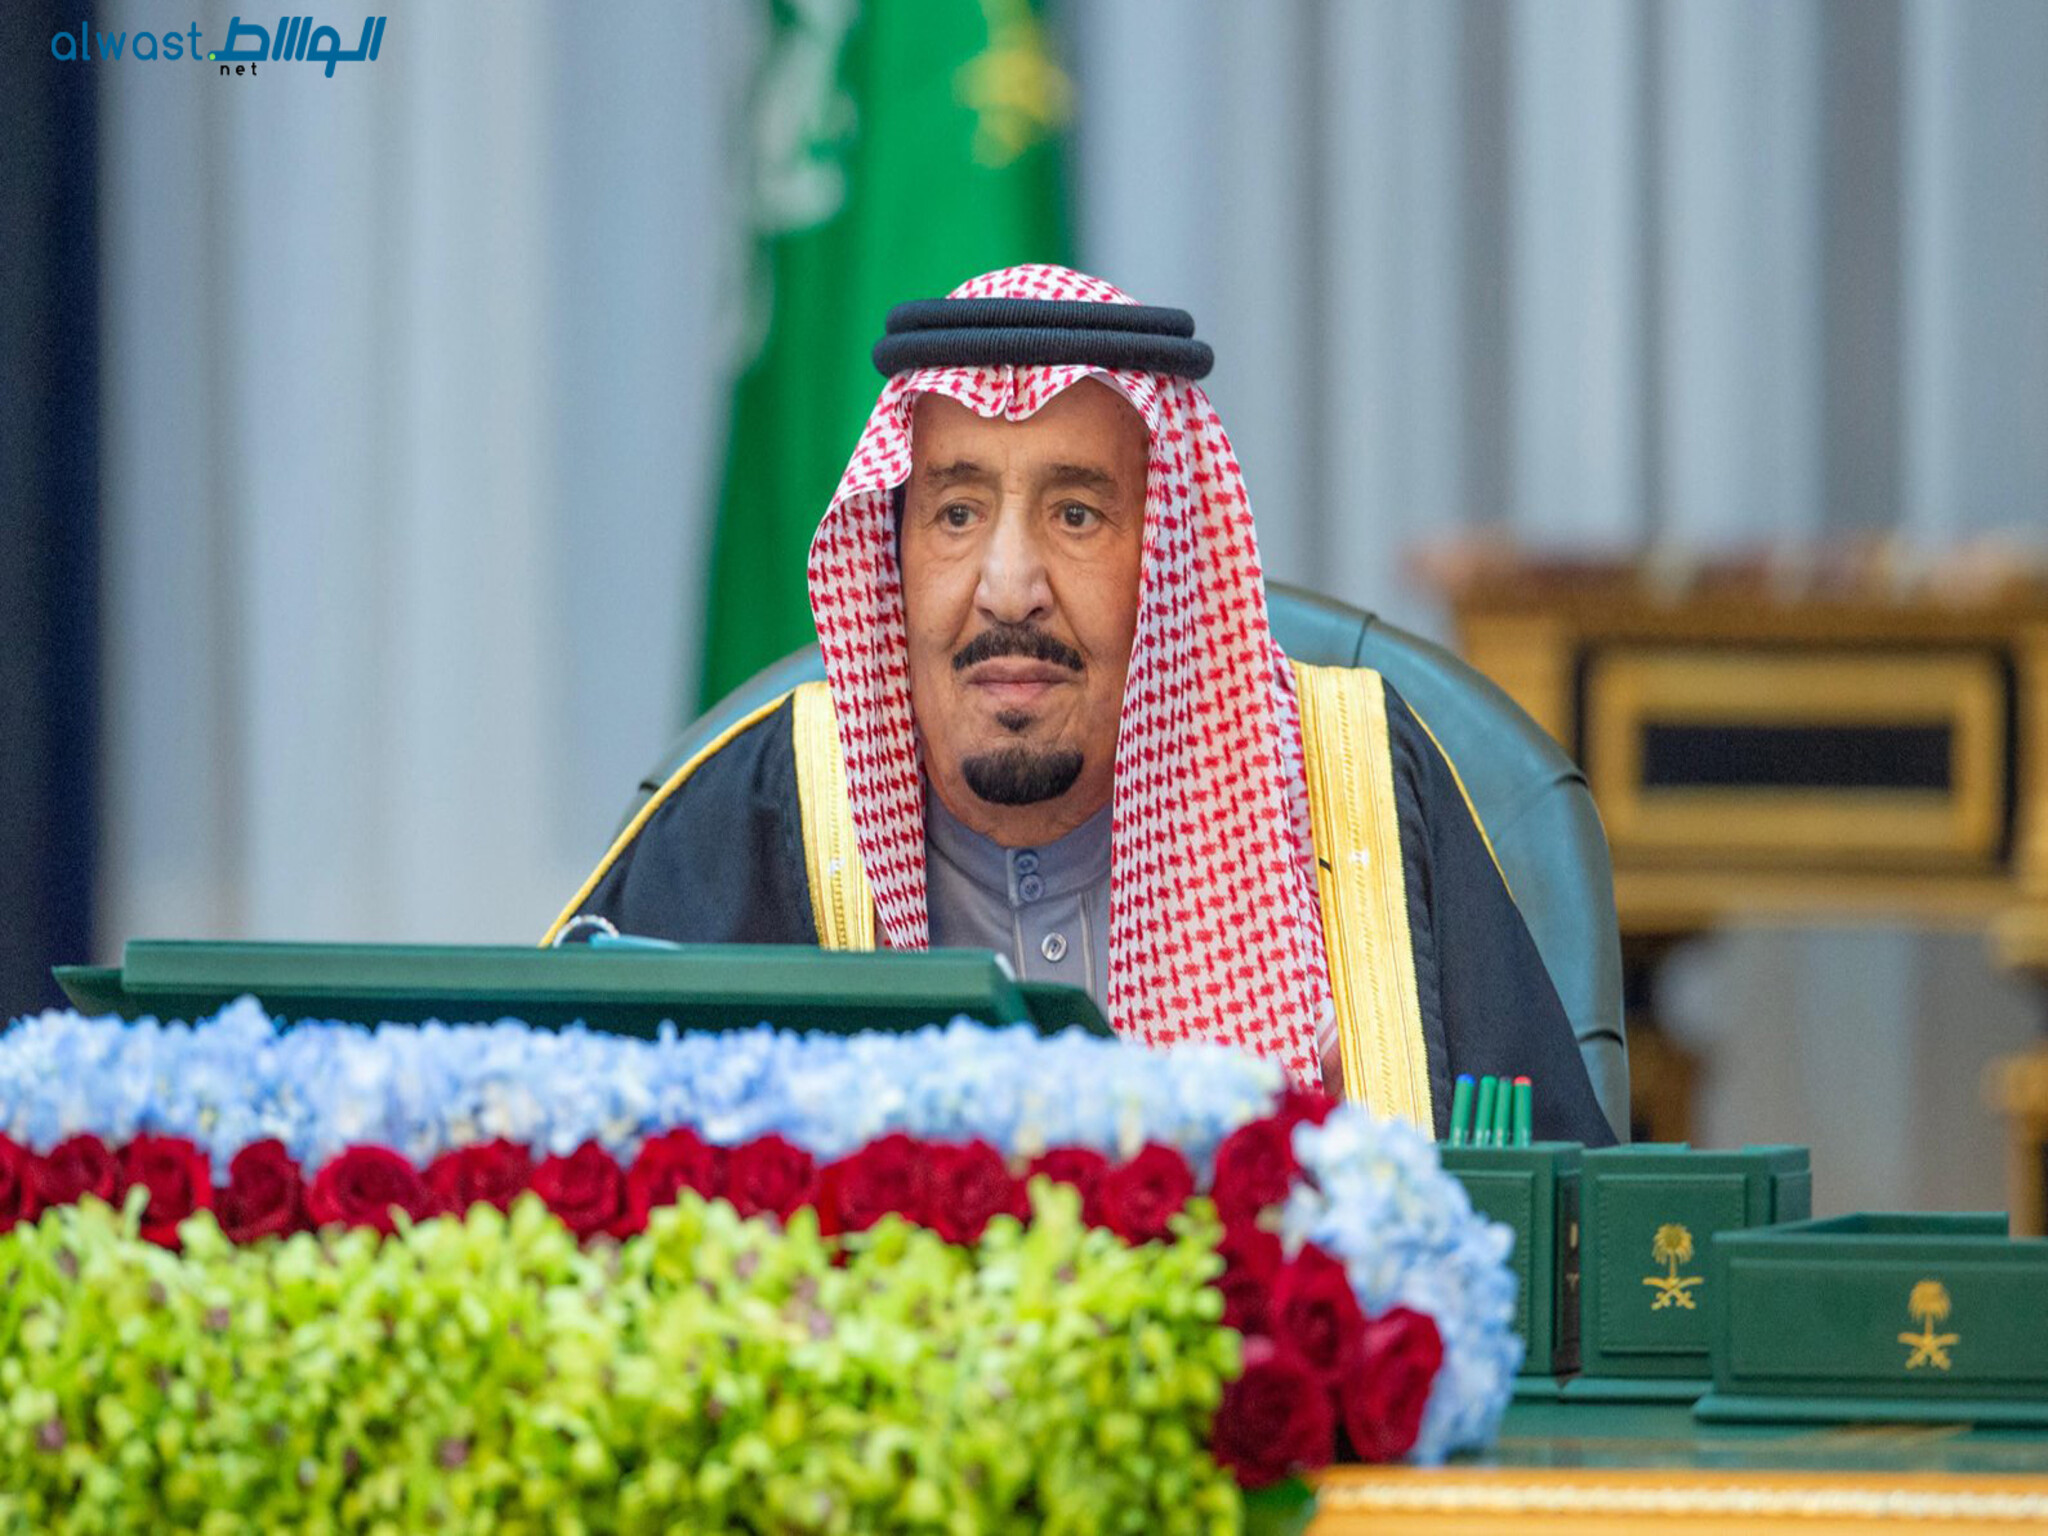 The Saudi government spotlights green initiatives and regional diplomacy